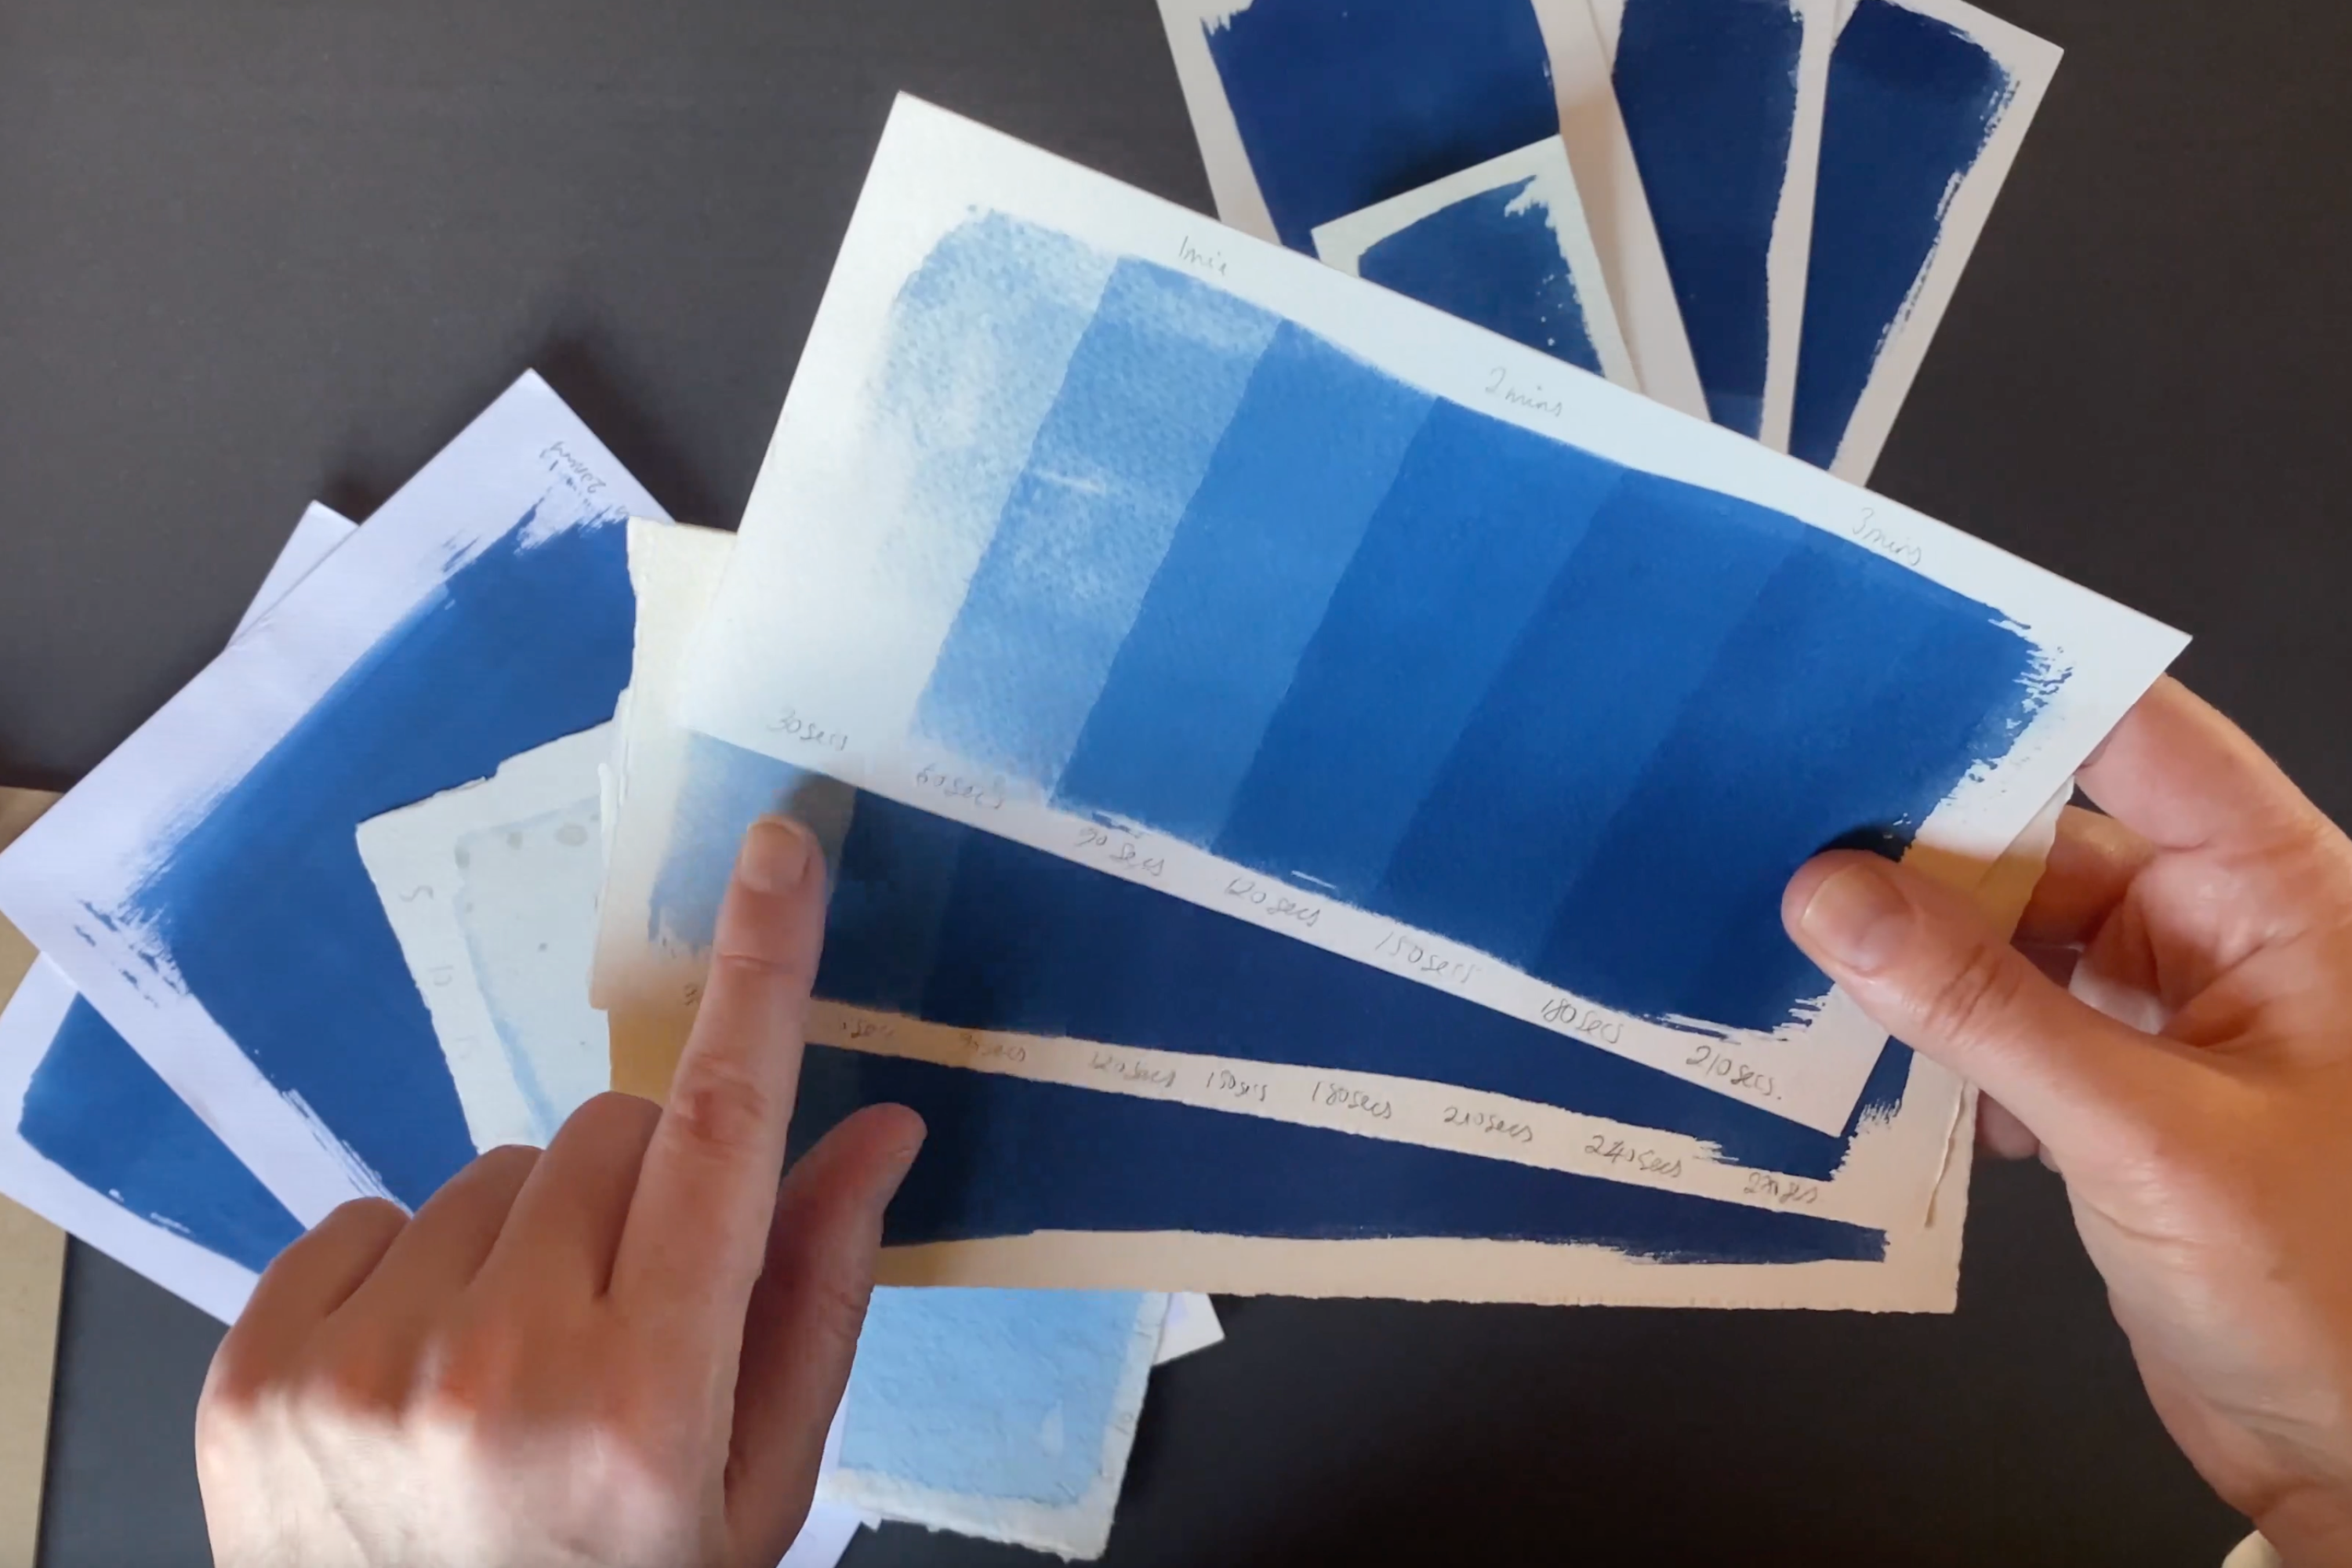 How to Make Cyanotypes, with The Wall Street Journal